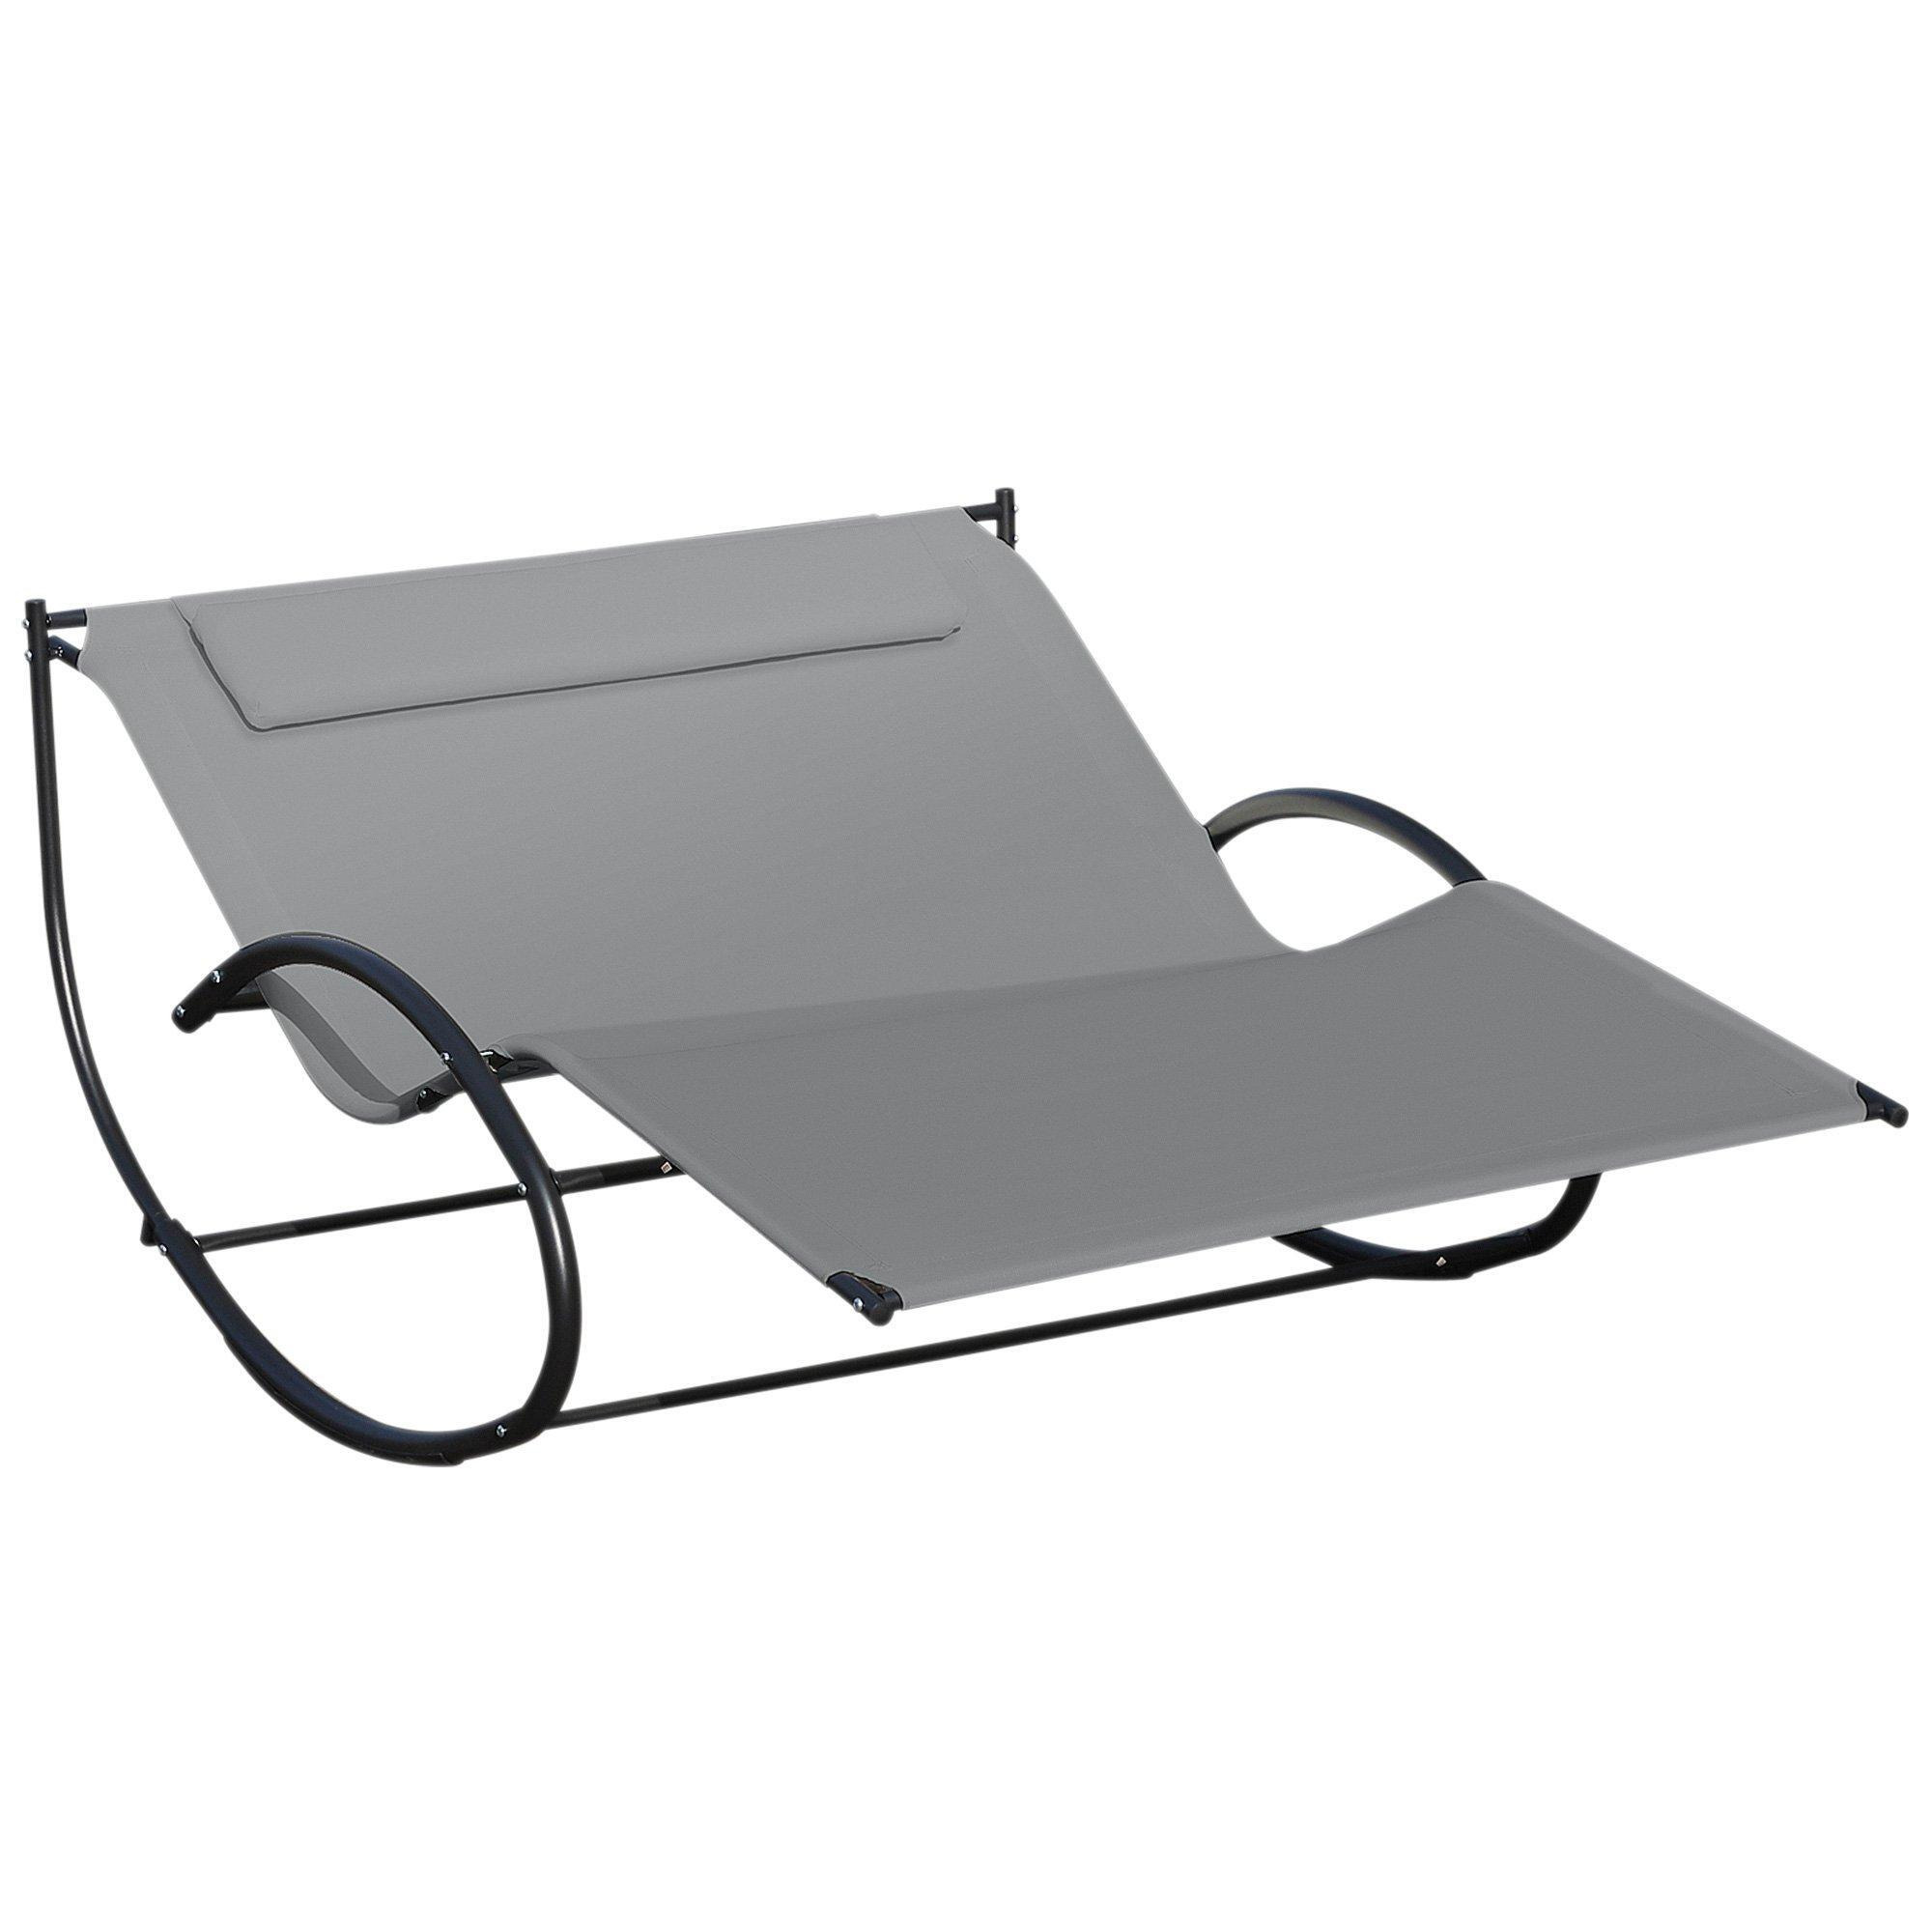 Hammock Chair Sun Bed Rock Seat with Metal Texteline with Pillow - image 1